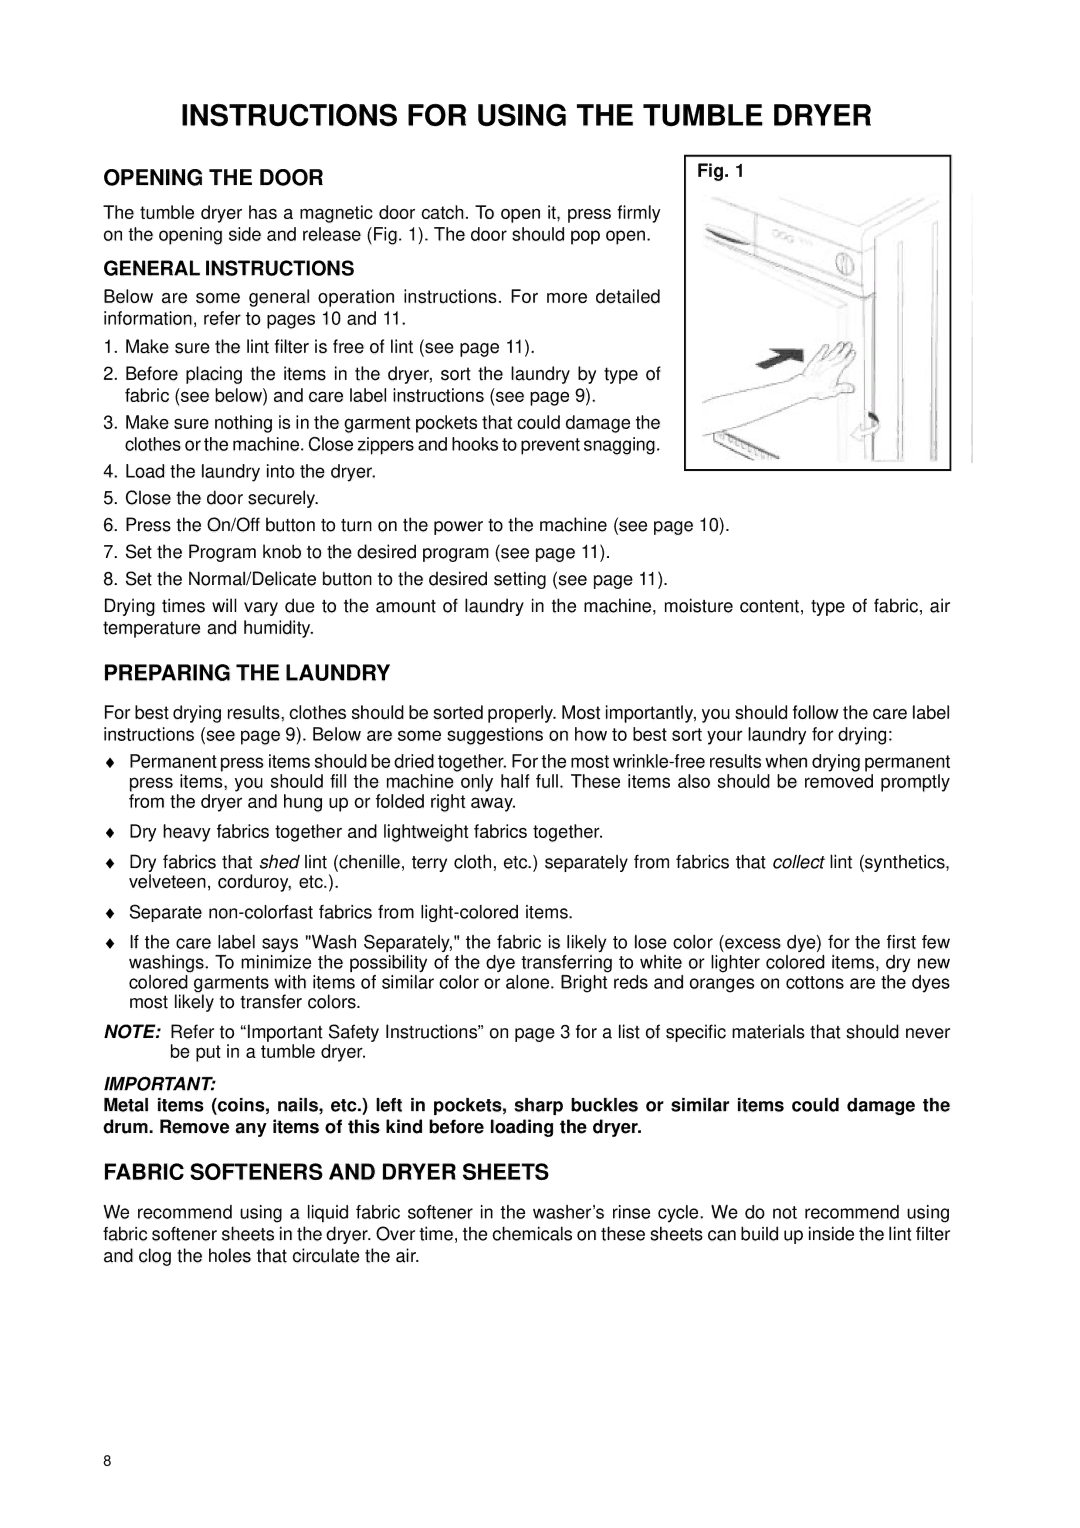 Eurotech Appliances EDC158 owner manual Instructions for Using the Tumble Dryer, Opening the Door, Preparing the Laundry 